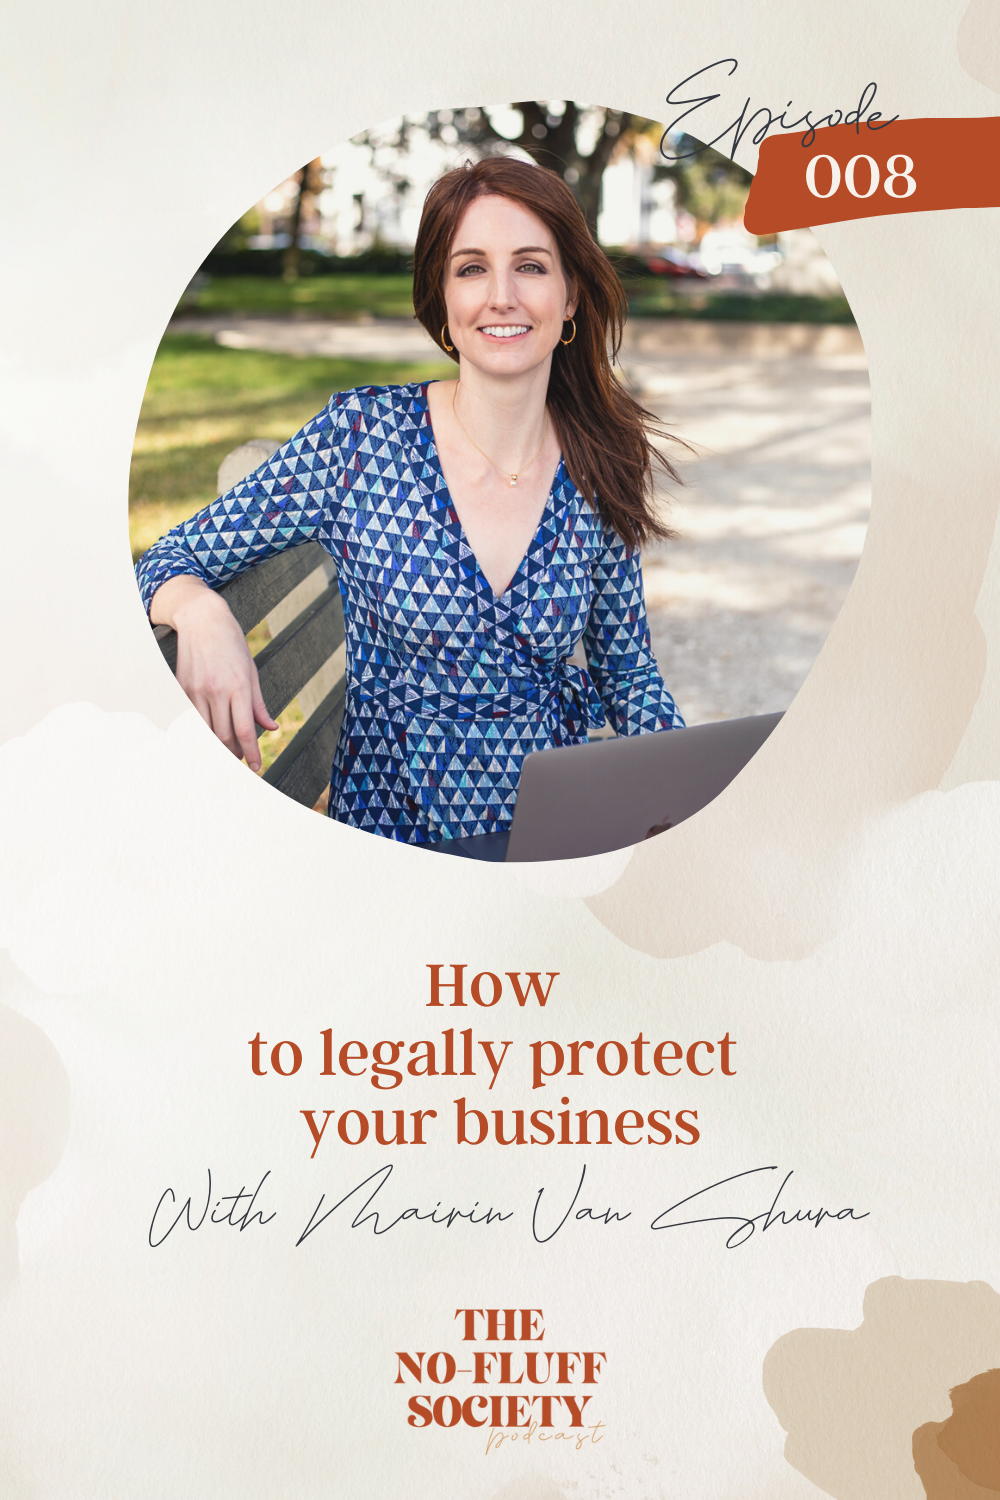 How to legally protect your business